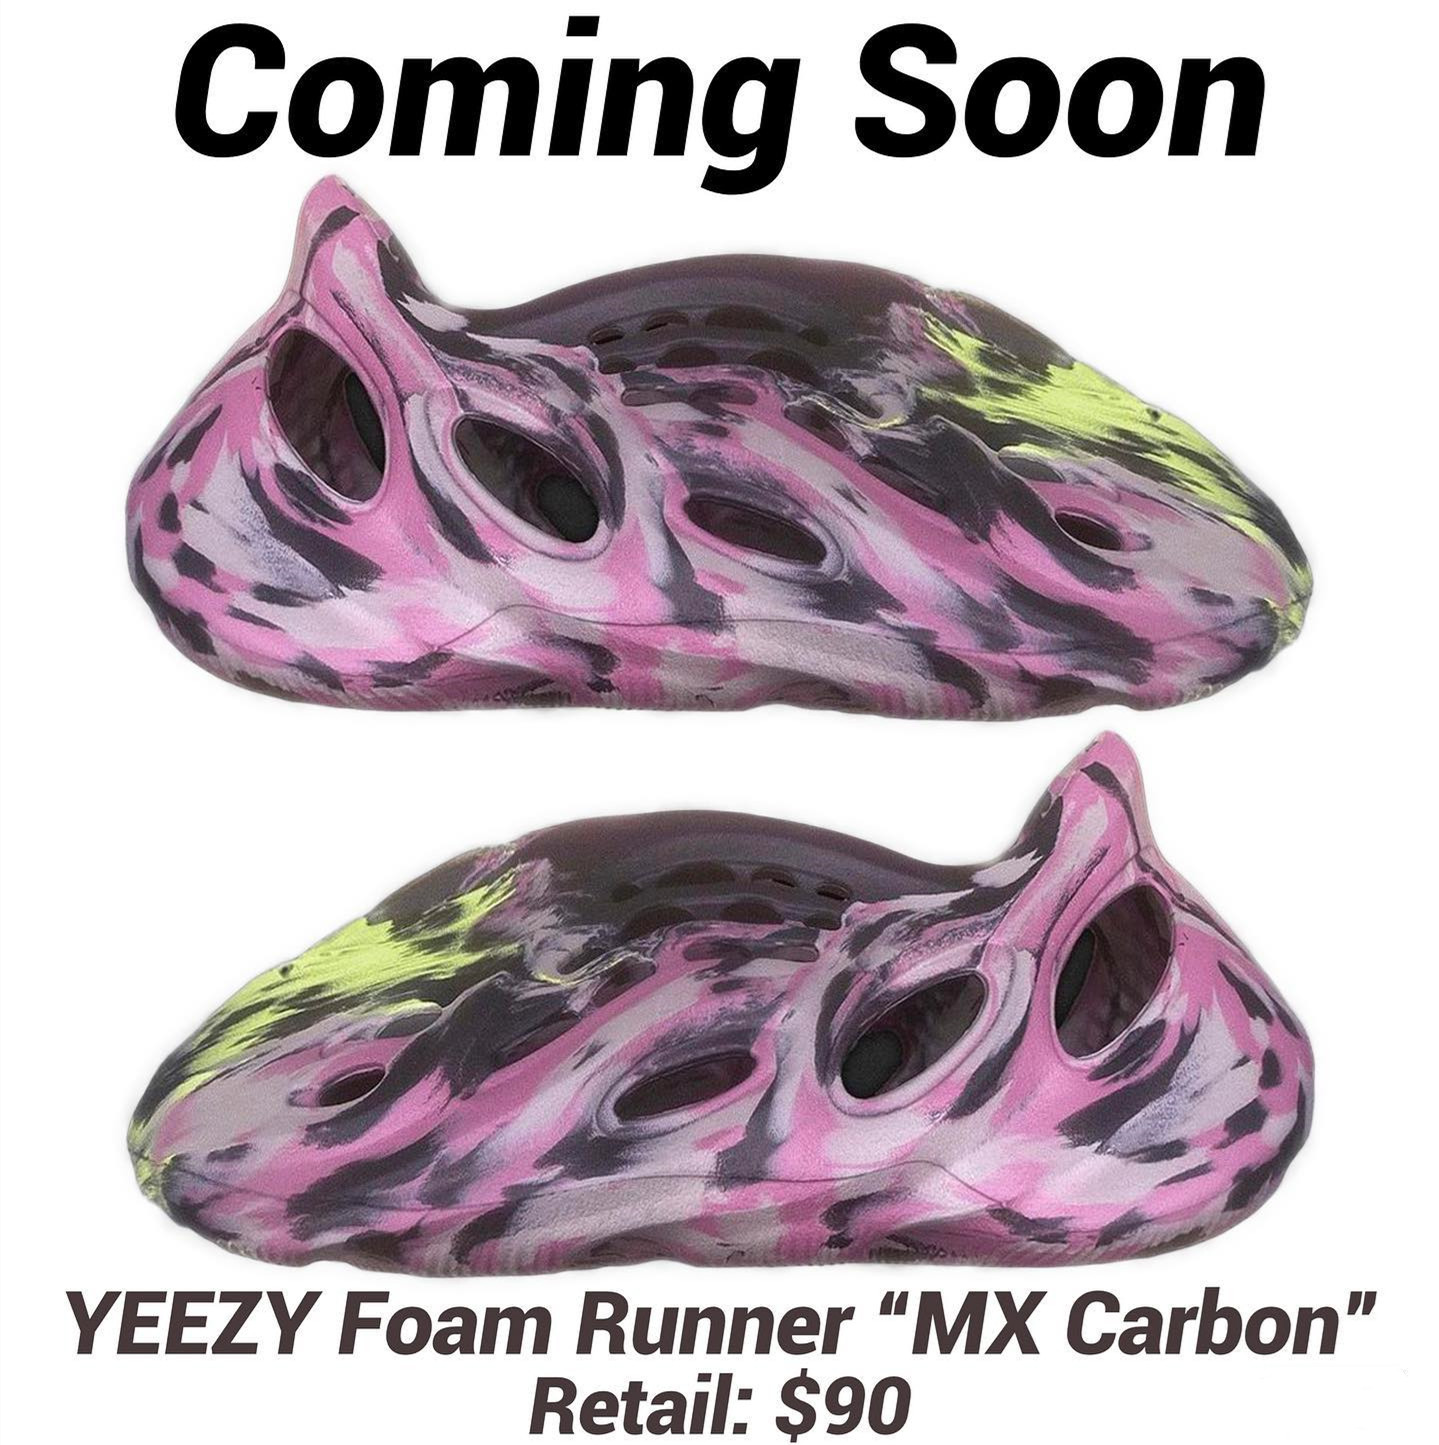 First look of the Yeezy Foam Runners “MX Carbon” - Hype Sneaker